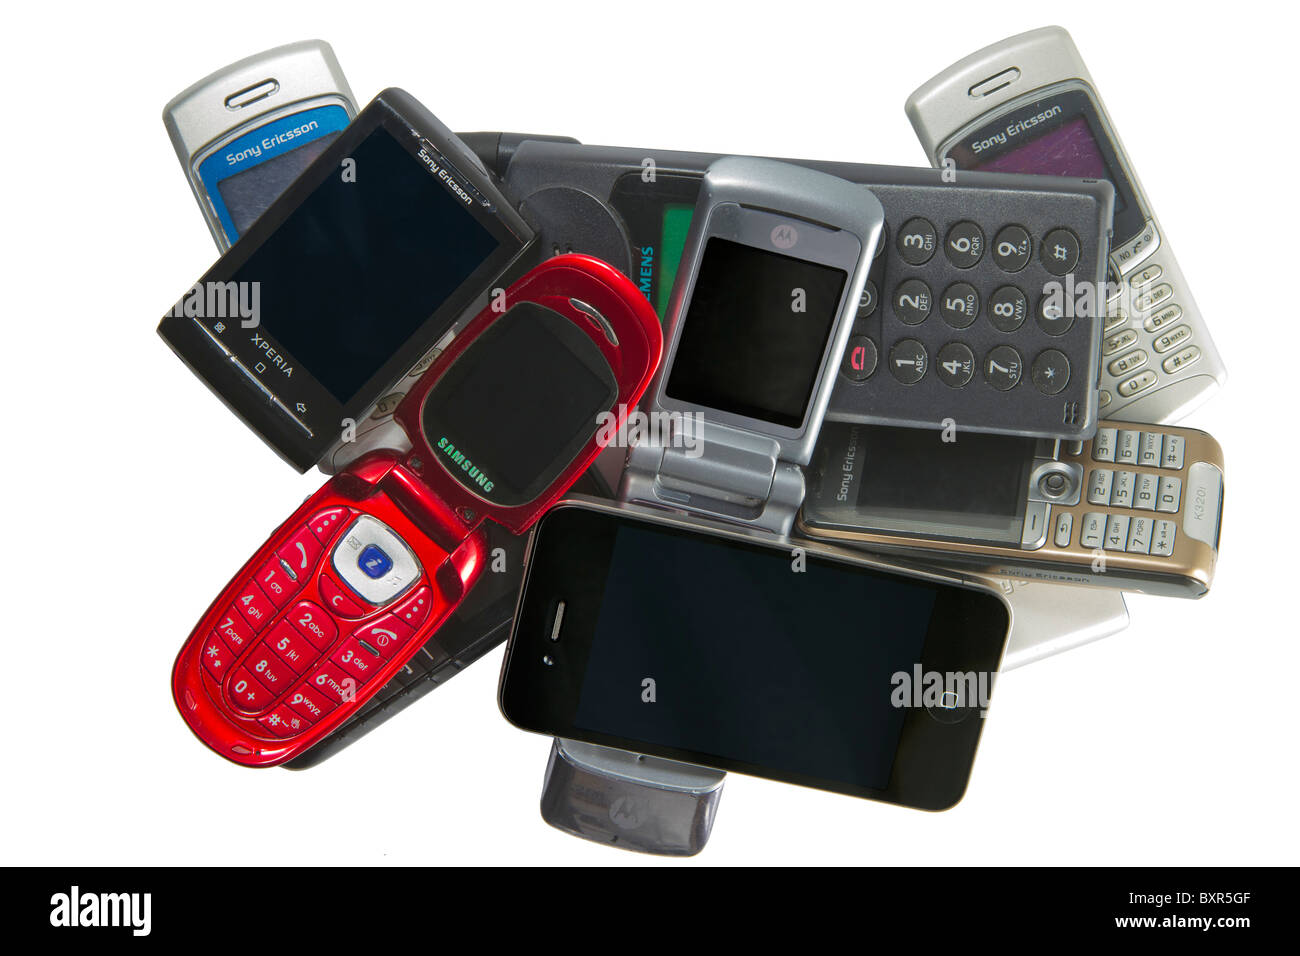 Pile of old and new mobile phones, including the Apple iPhone 4 and the Android phone Sony Ericsson Xperia X10 mini. Stock Photo